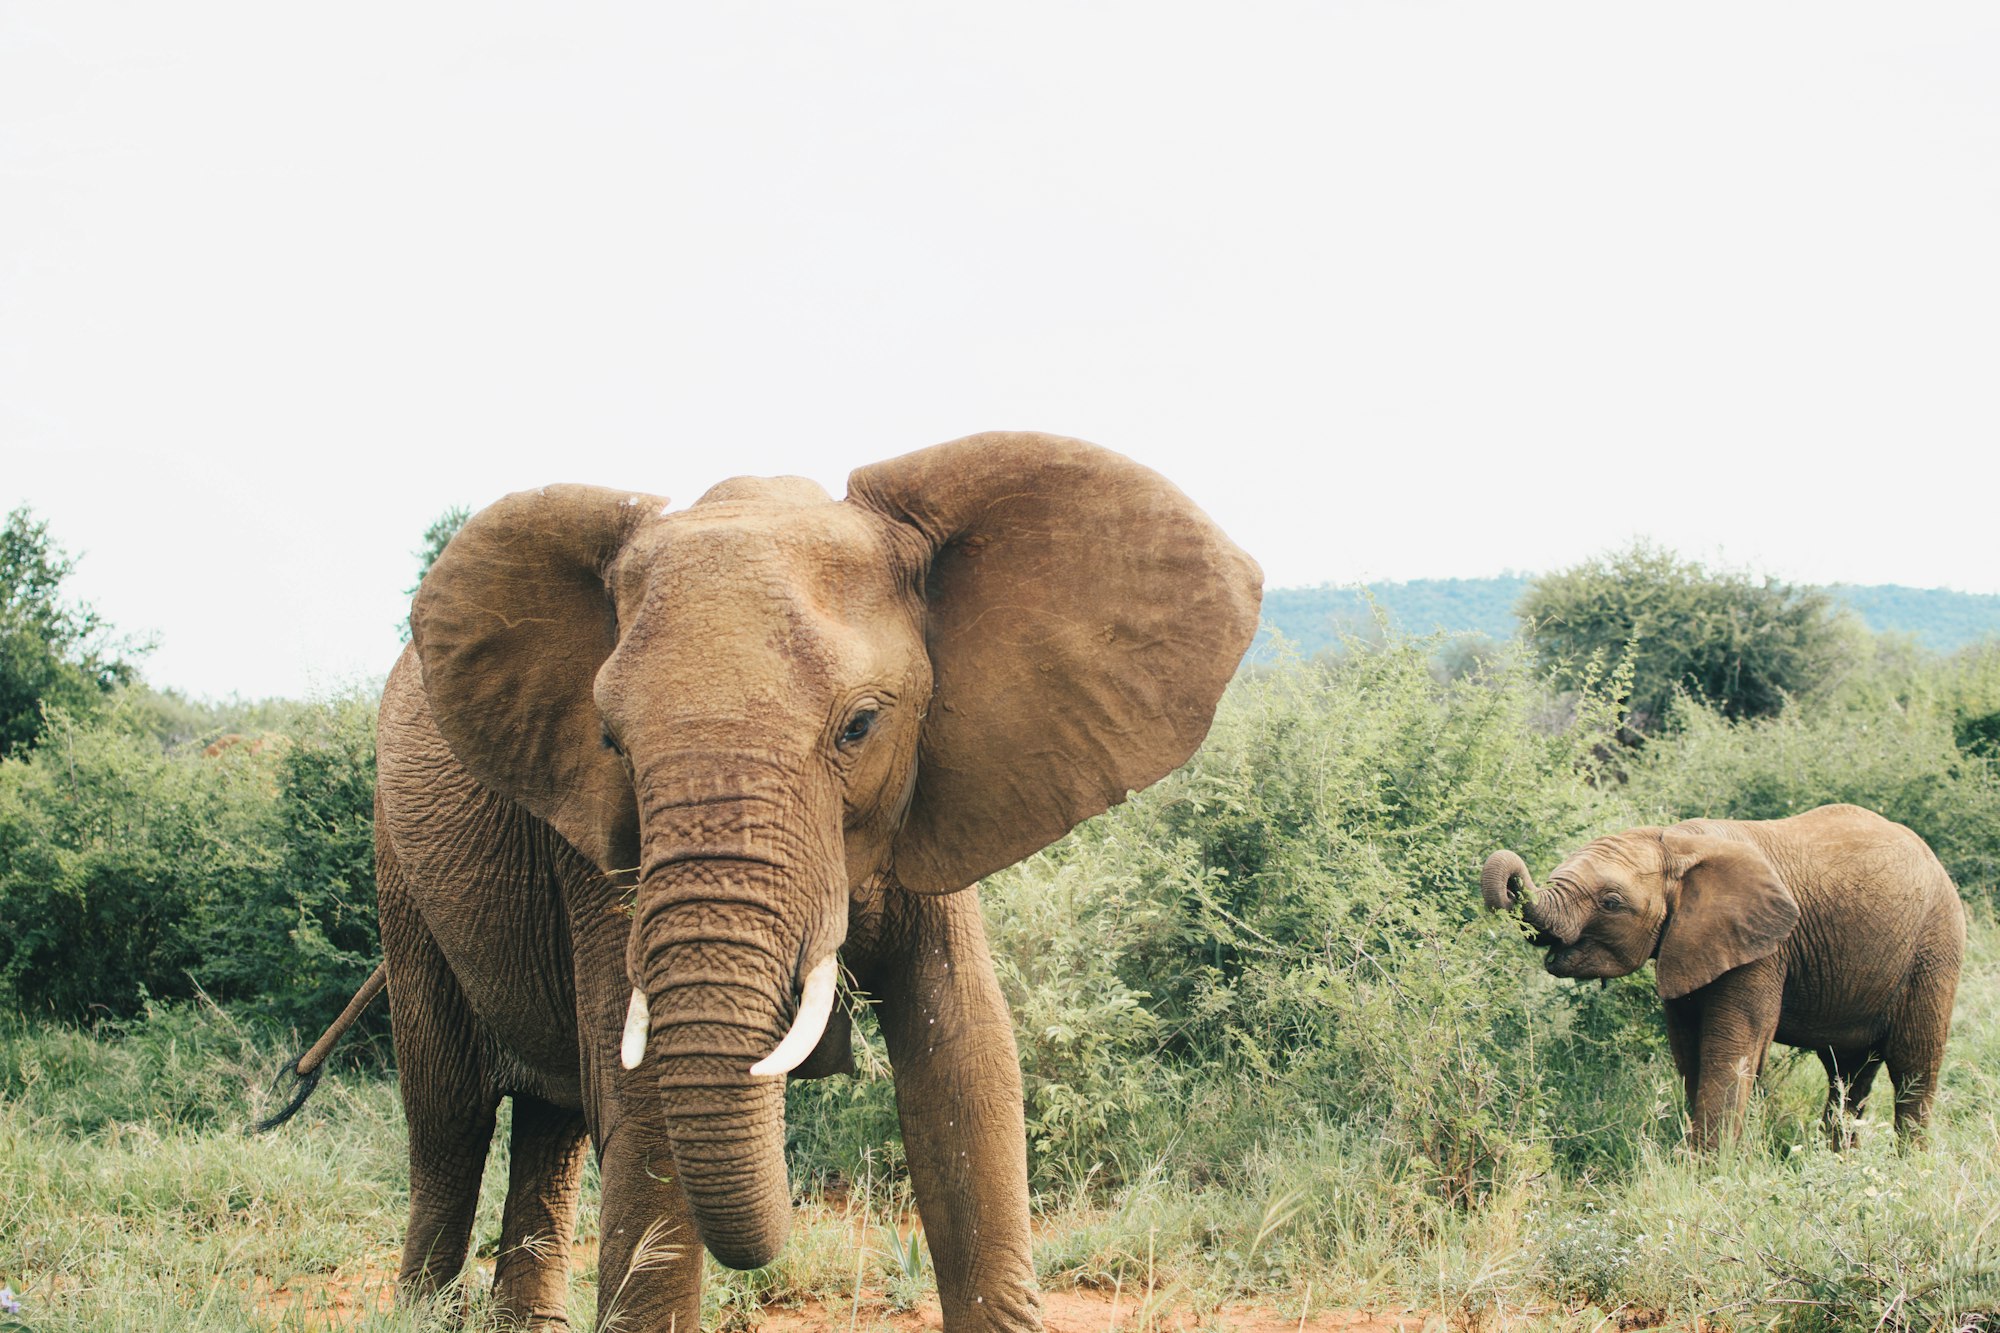 A photo of two elephants. One is facing the camera showing its tusk while the other is eating in the background